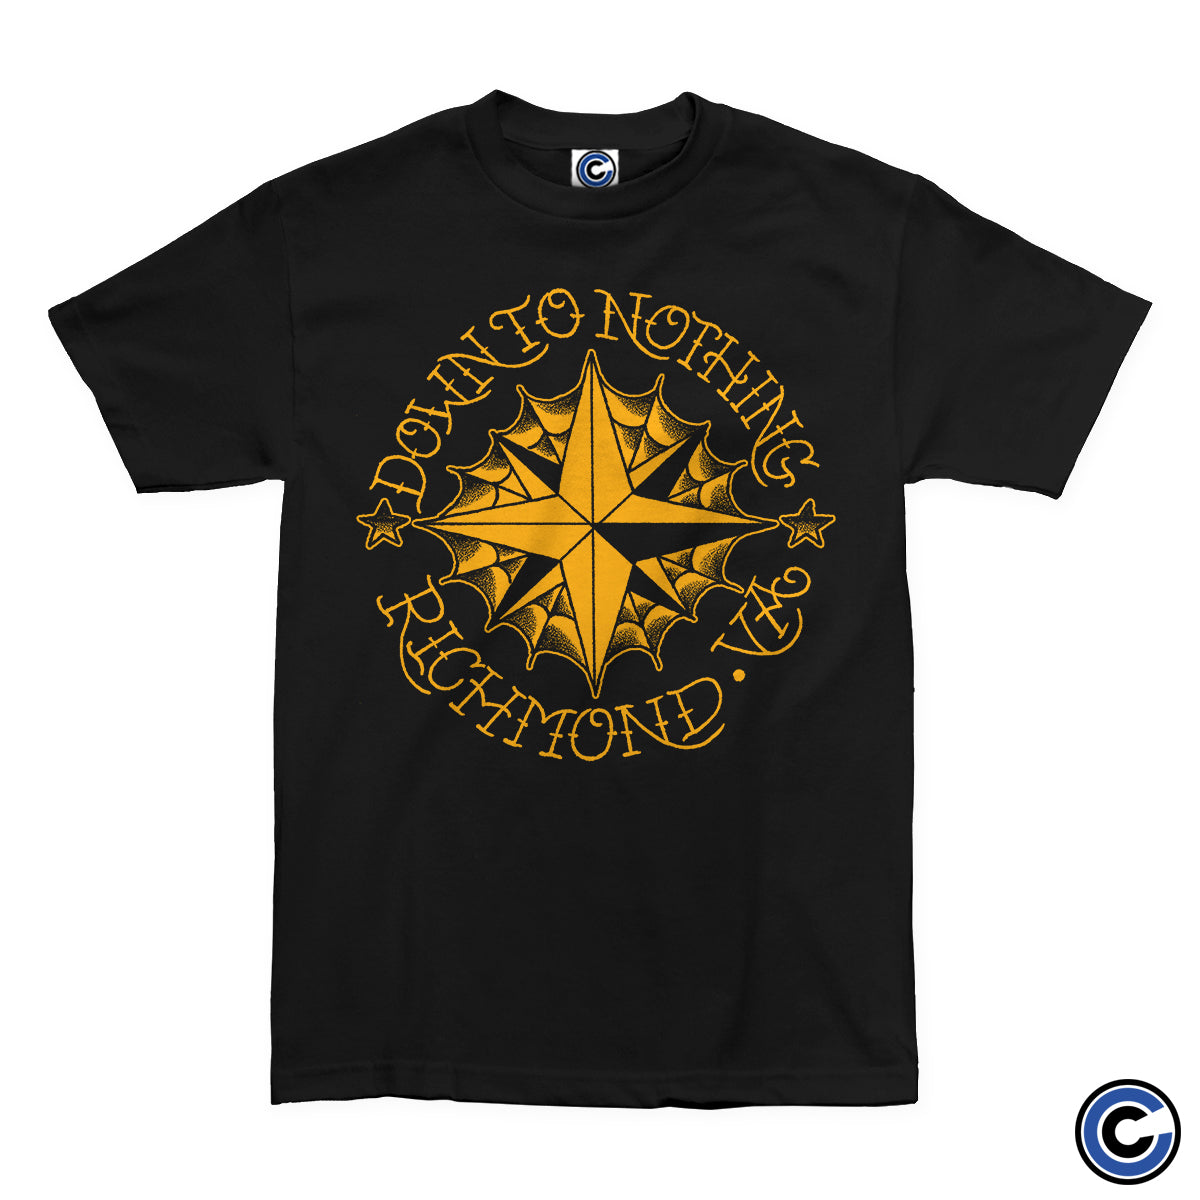 Down To Nothing "Compass" Shirt